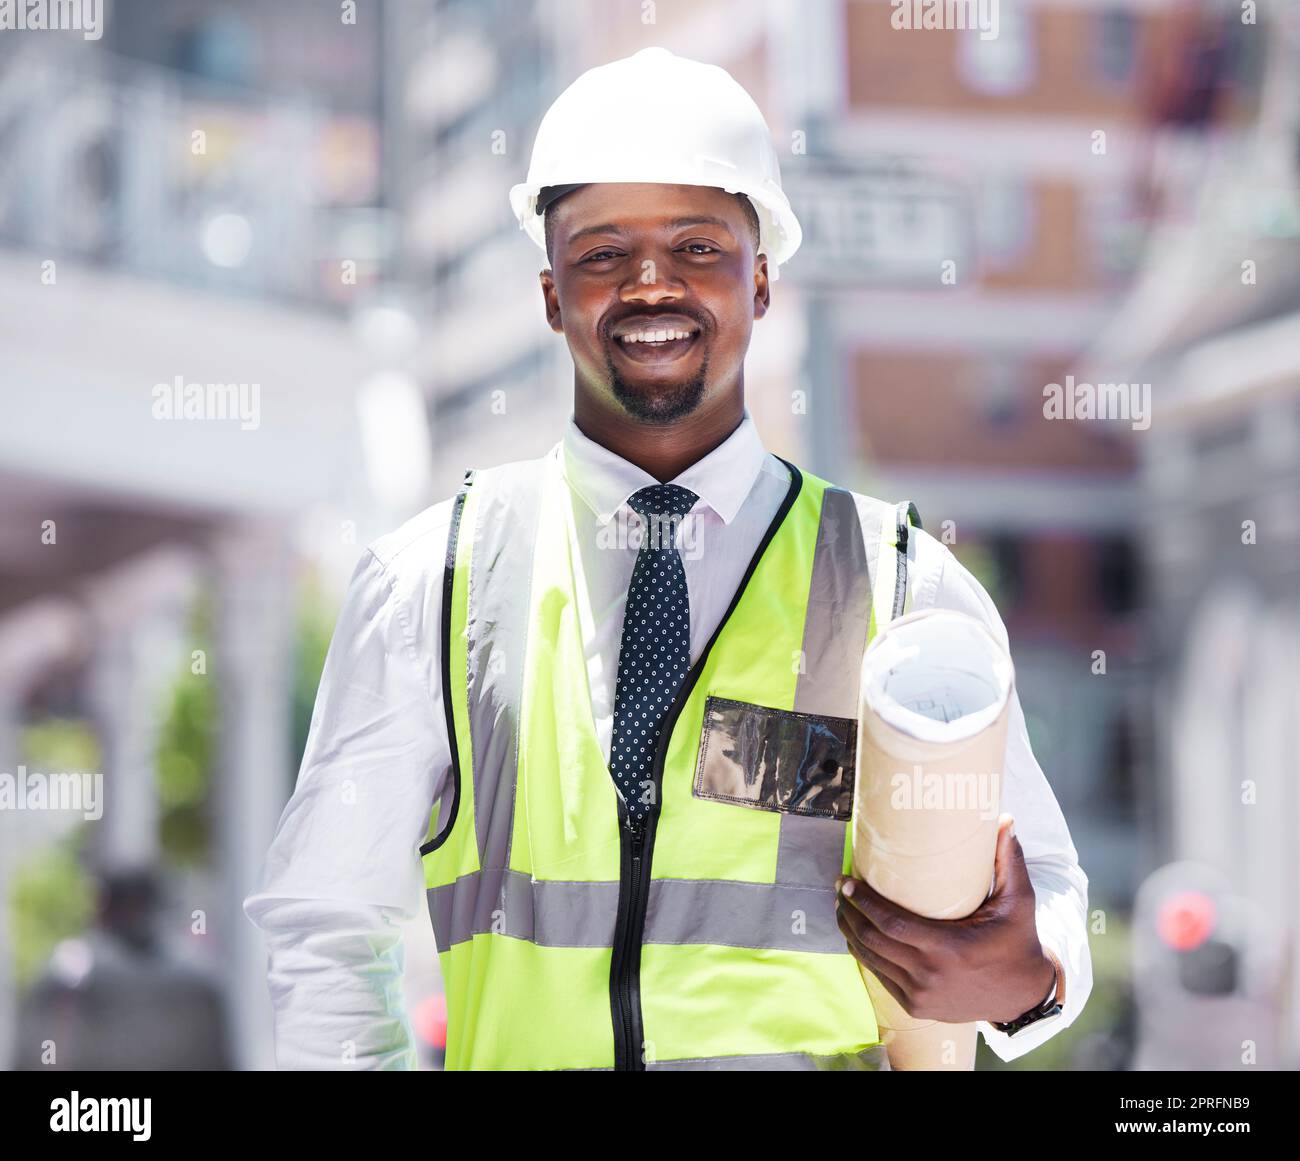 Business, builder and contractor man holding building plans with a vision for success in construction. Portrait of a happy smiling black man with a plan and idea for architecture design in the city. Stock Photo